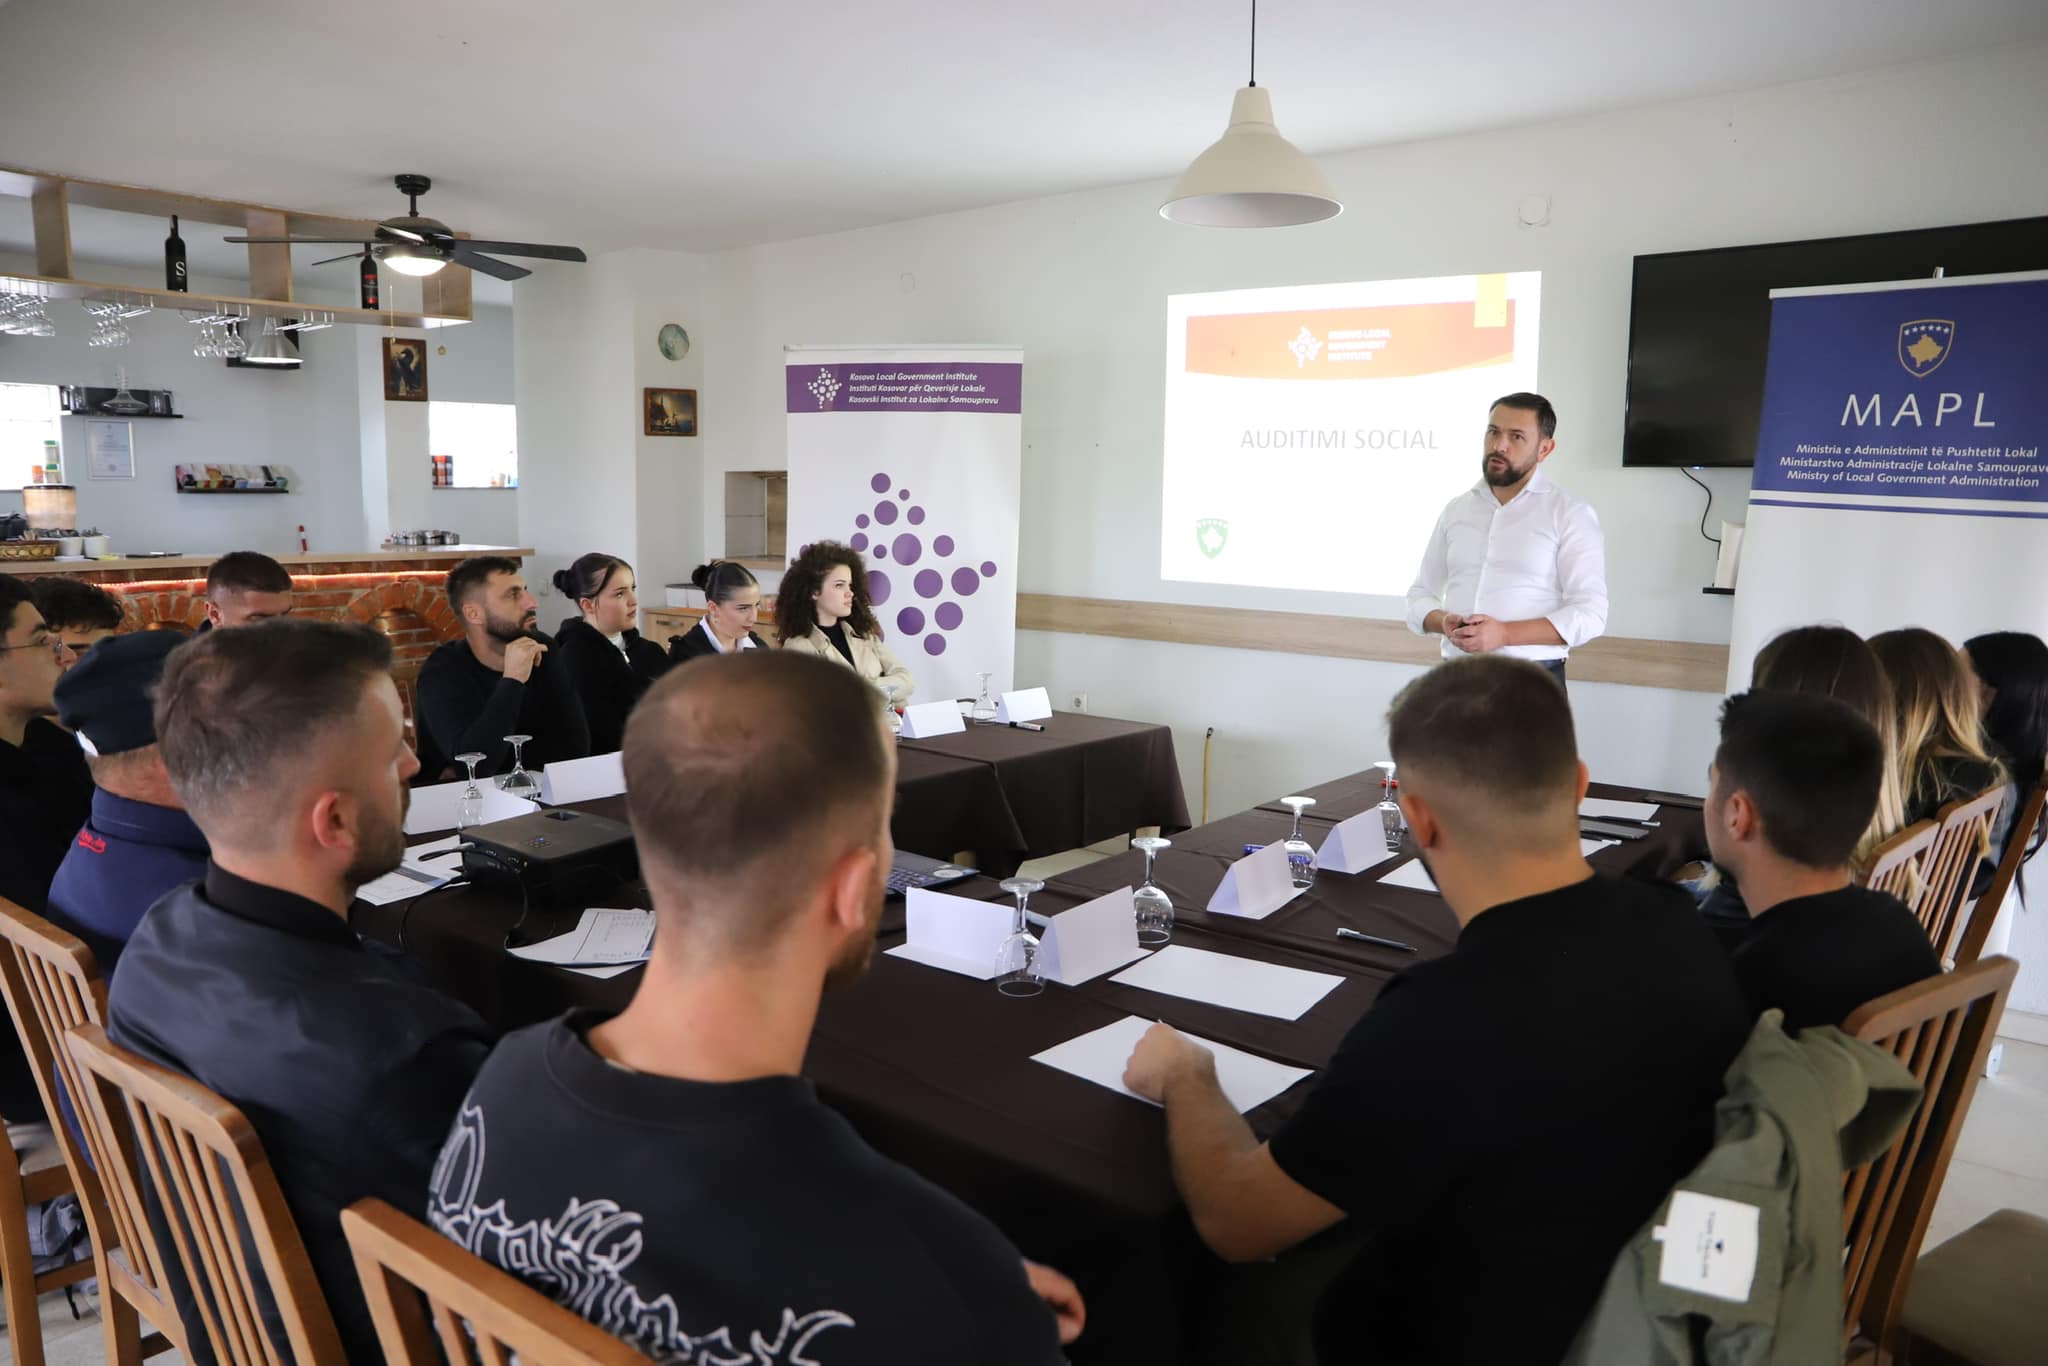 You are currently viewing The training for the Social Audit group in Gracanica was conducted.